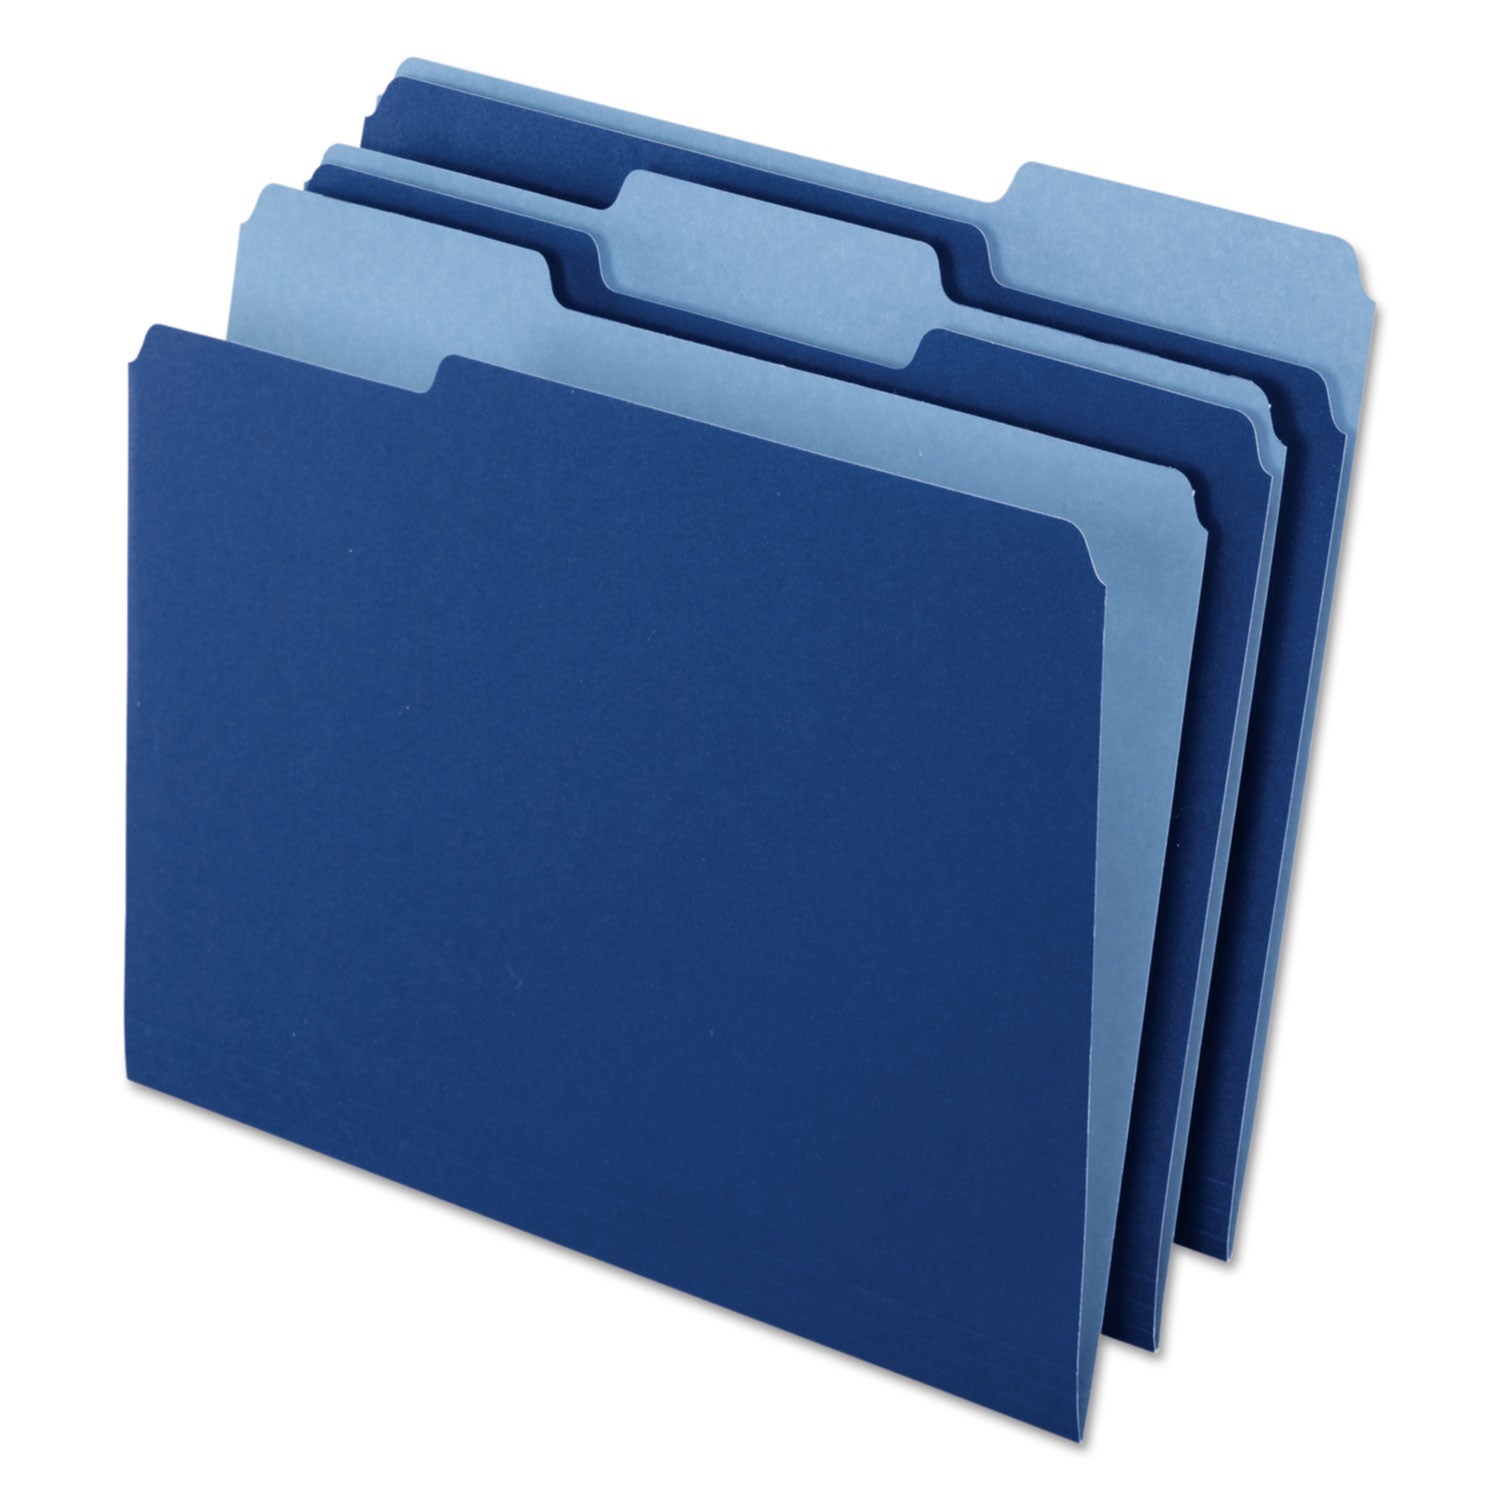 Interior File Folders, 1/3-Cut Tabs: Assorted, Letter Size, Navy Blue, 100/Box - 